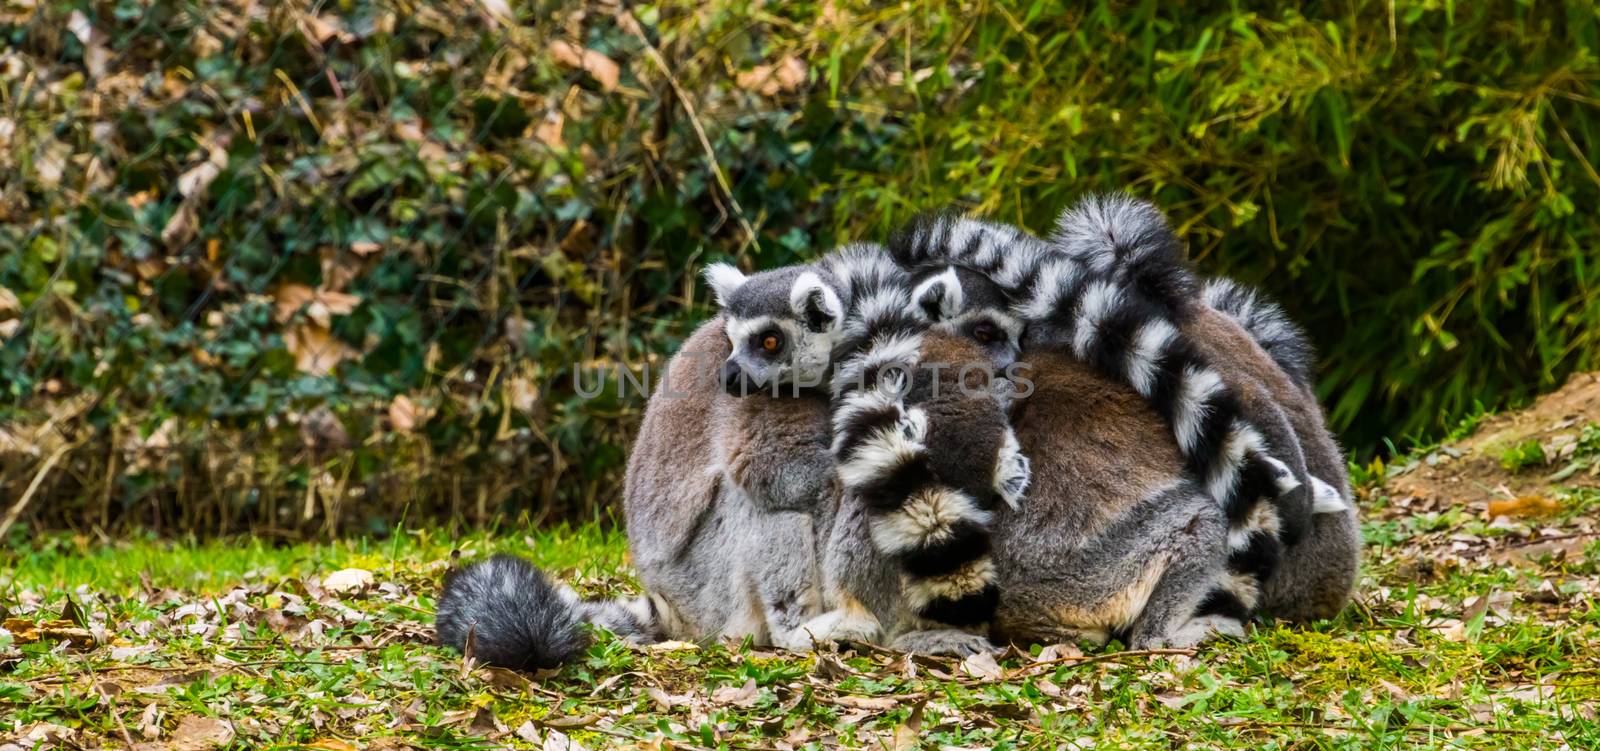 close group of ring tailed lemur monkeys hugging each other, funny and adorable animal behavior